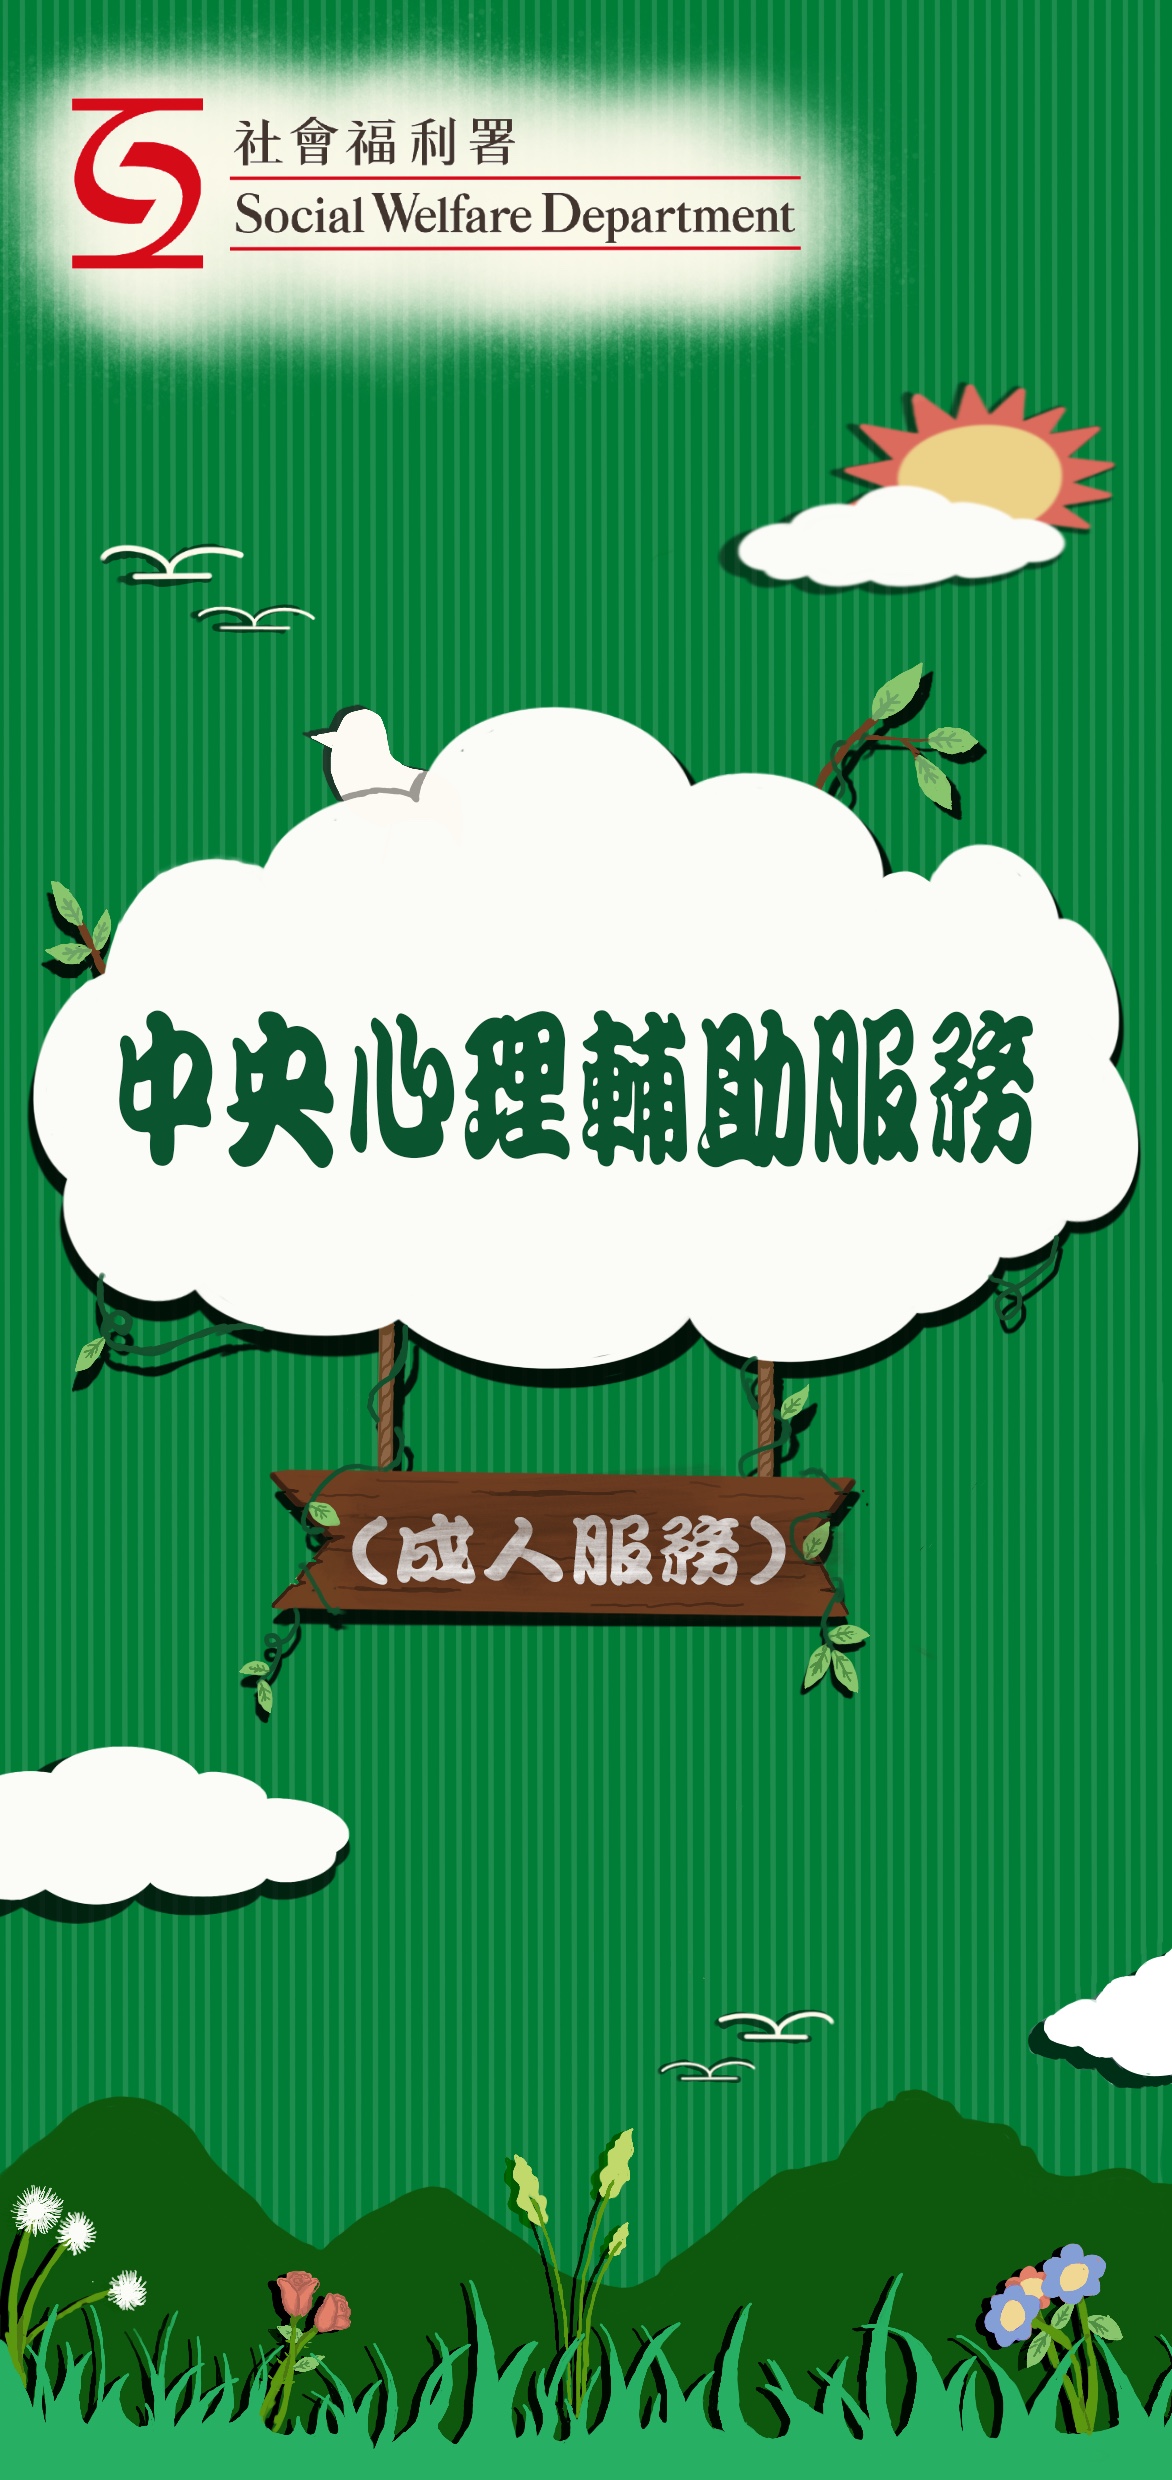 Central Psychological Support Service
                (Adult Service)
                (Chinese and English)